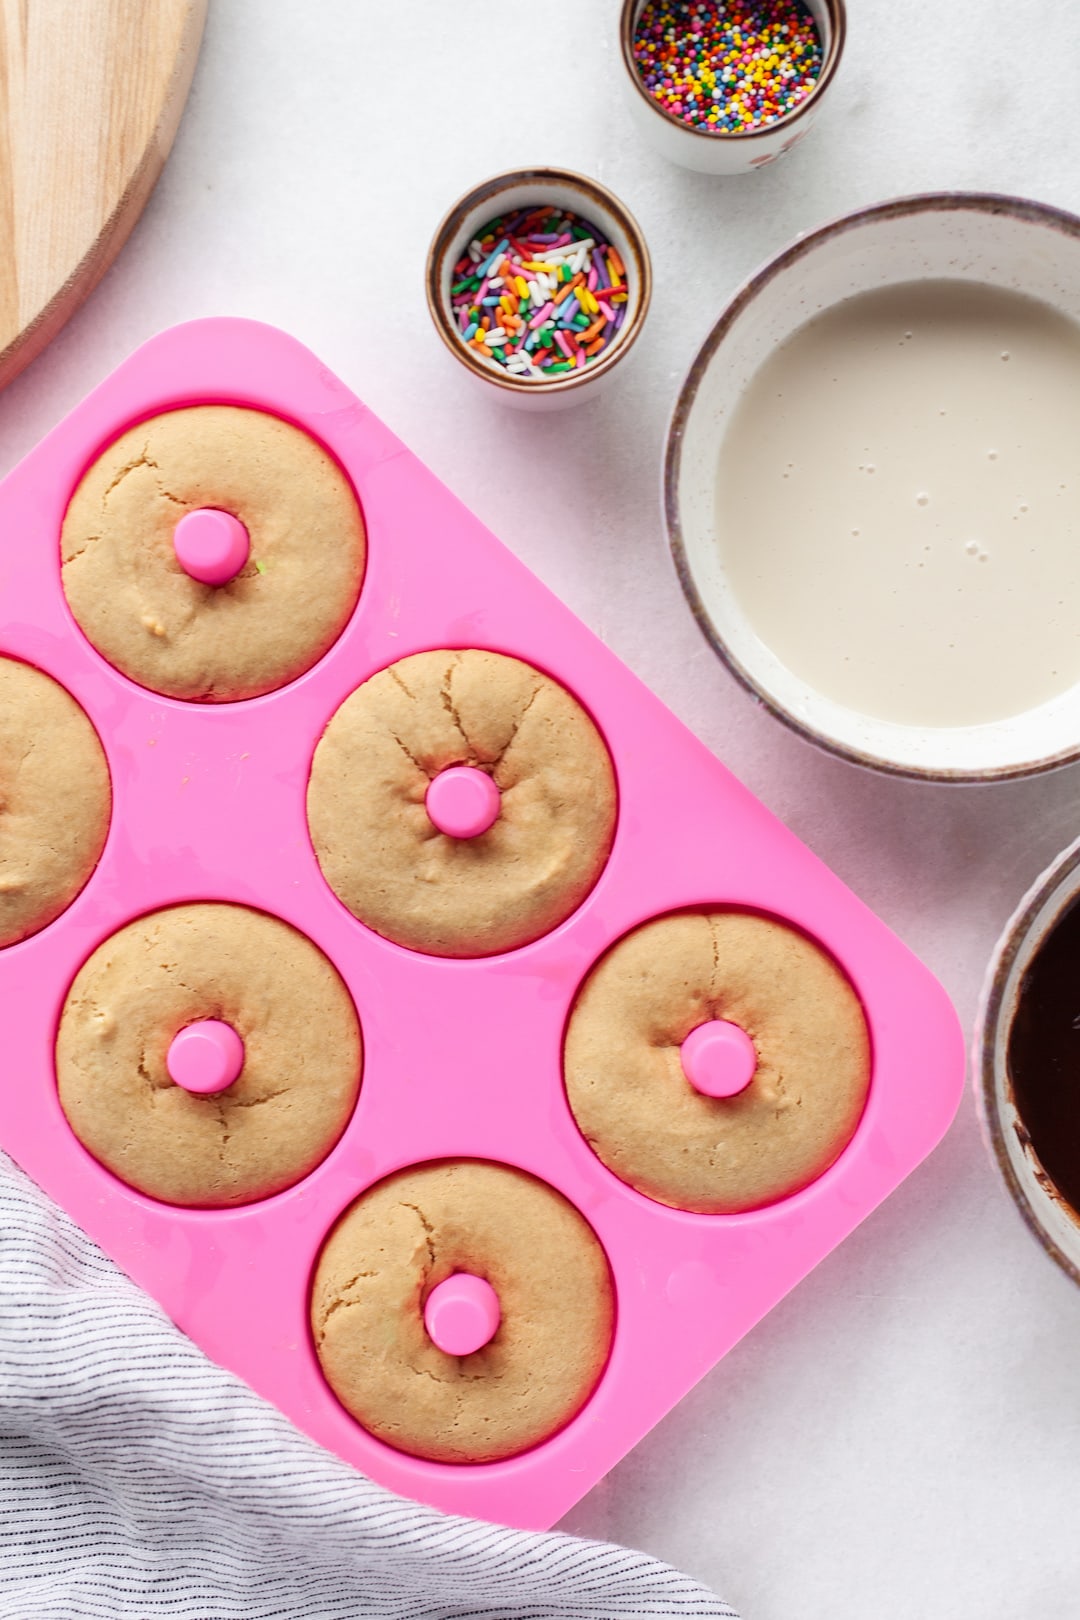 baked simple vanilla protein donuts in a pink silicone donut mould